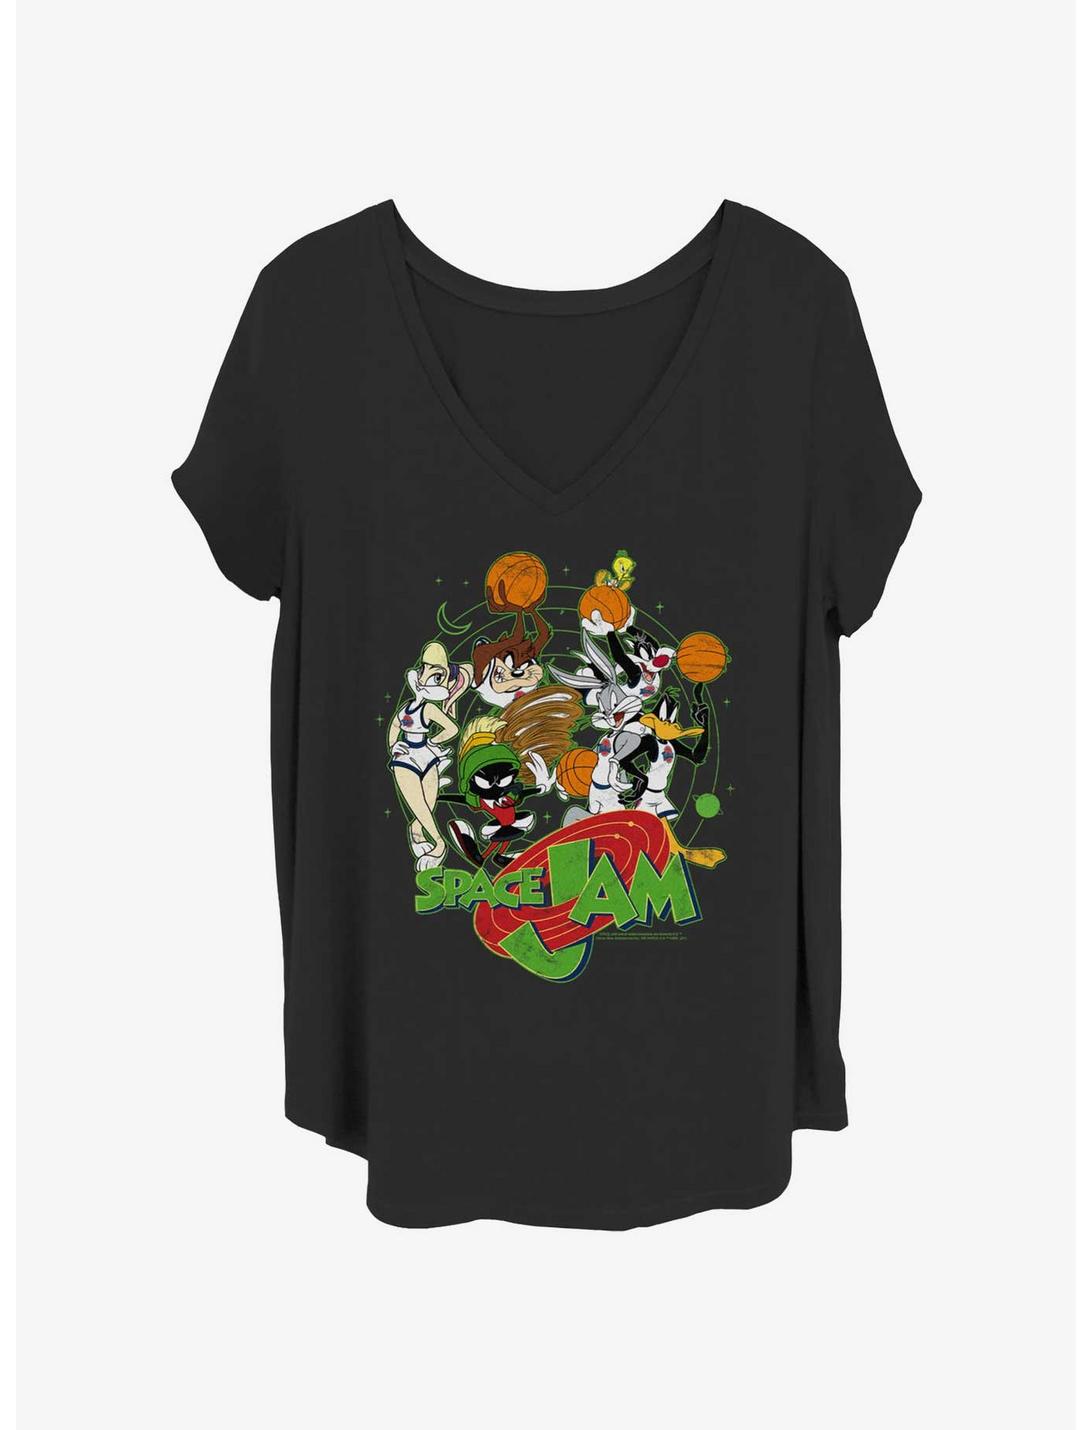 Space Jam Characters In Space Girls T-Shirt Plus Size, BLACK, hi-res